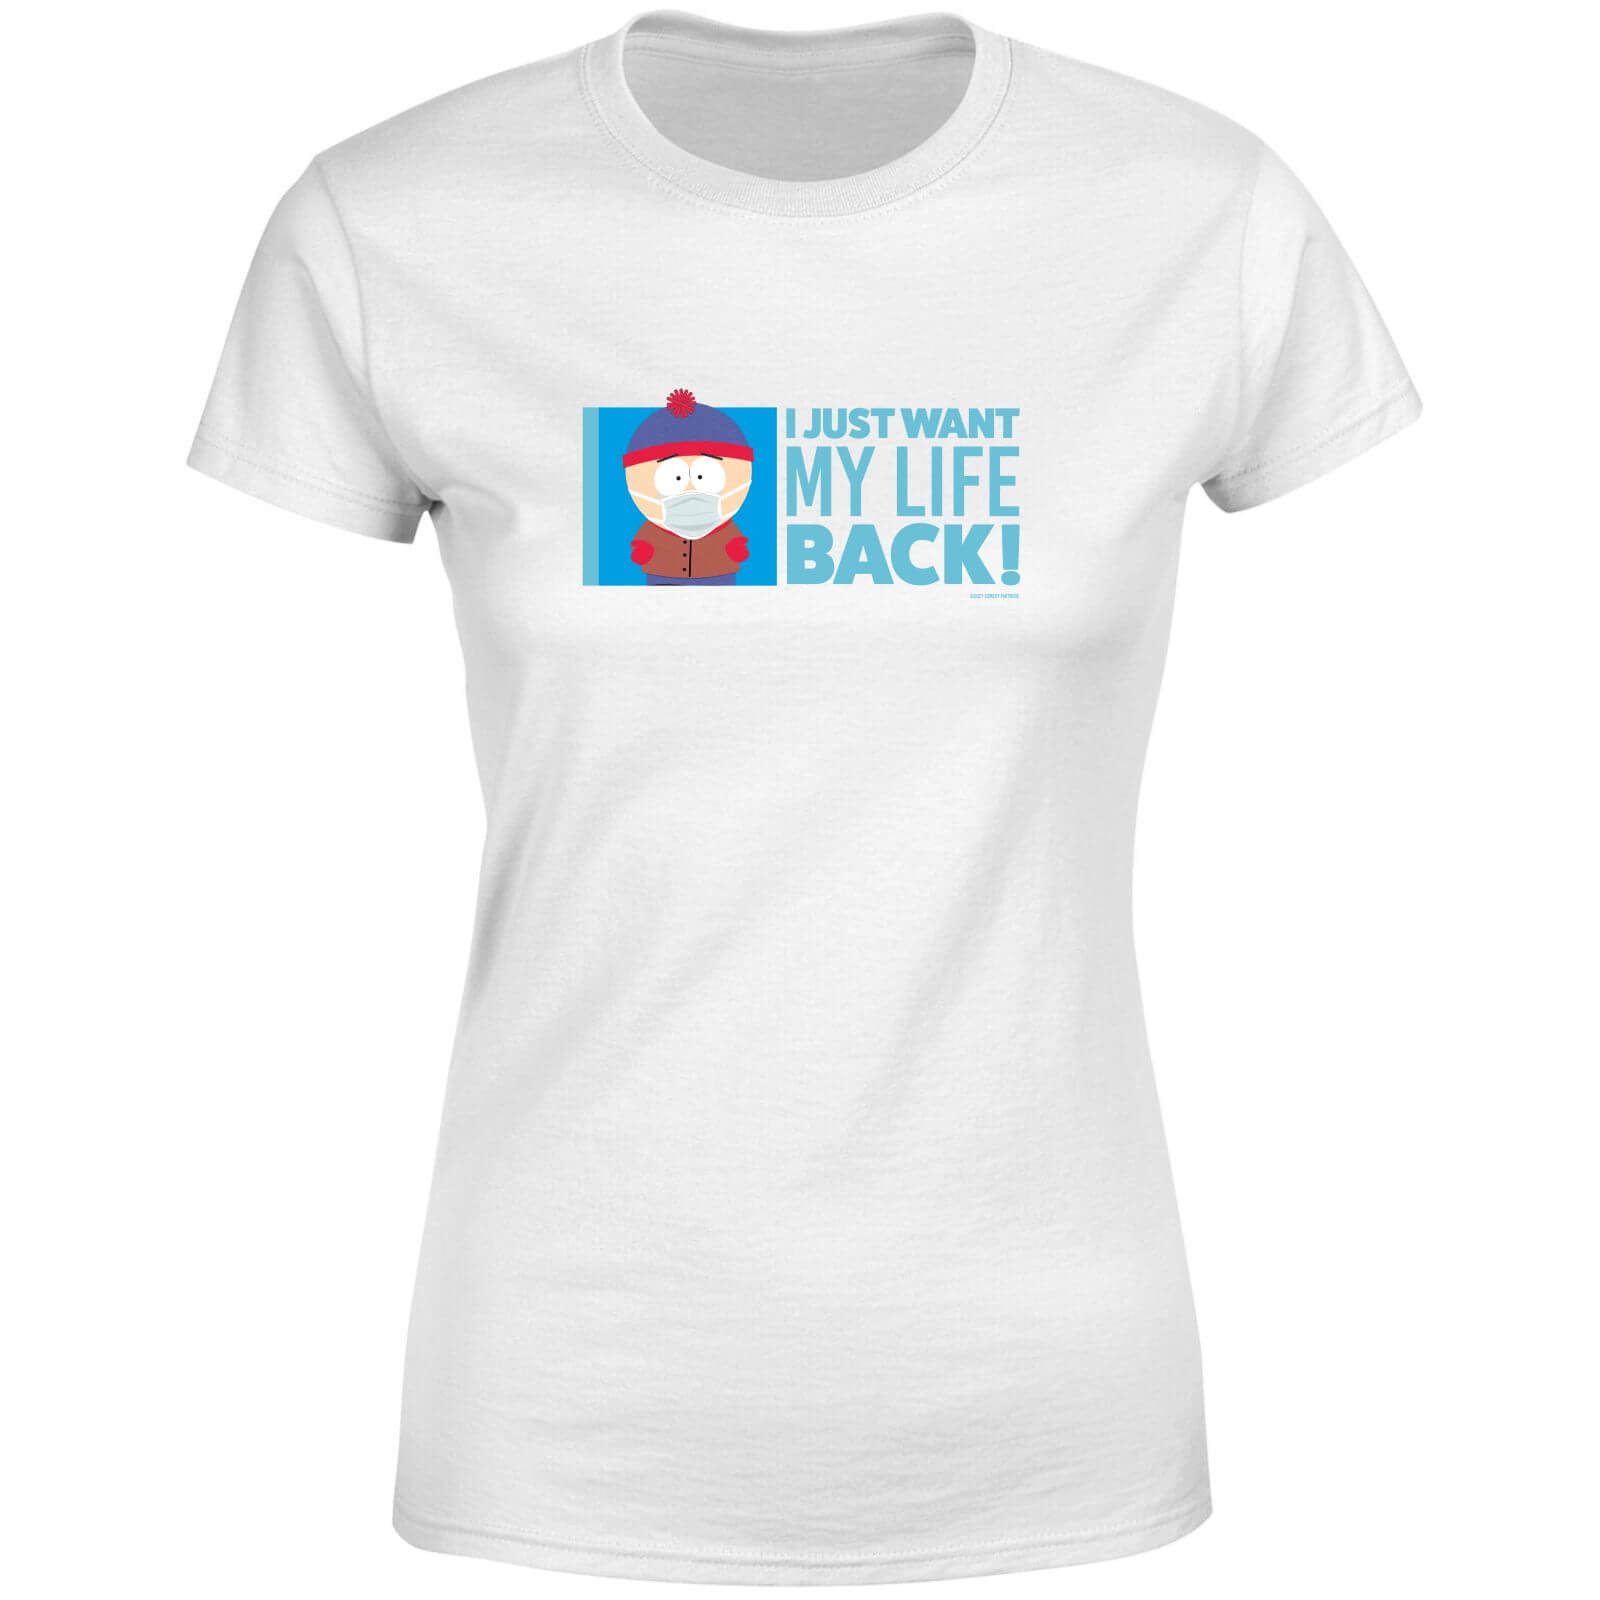 South Park I Just Want My Life Back Women%27s T-Shirt - White - L